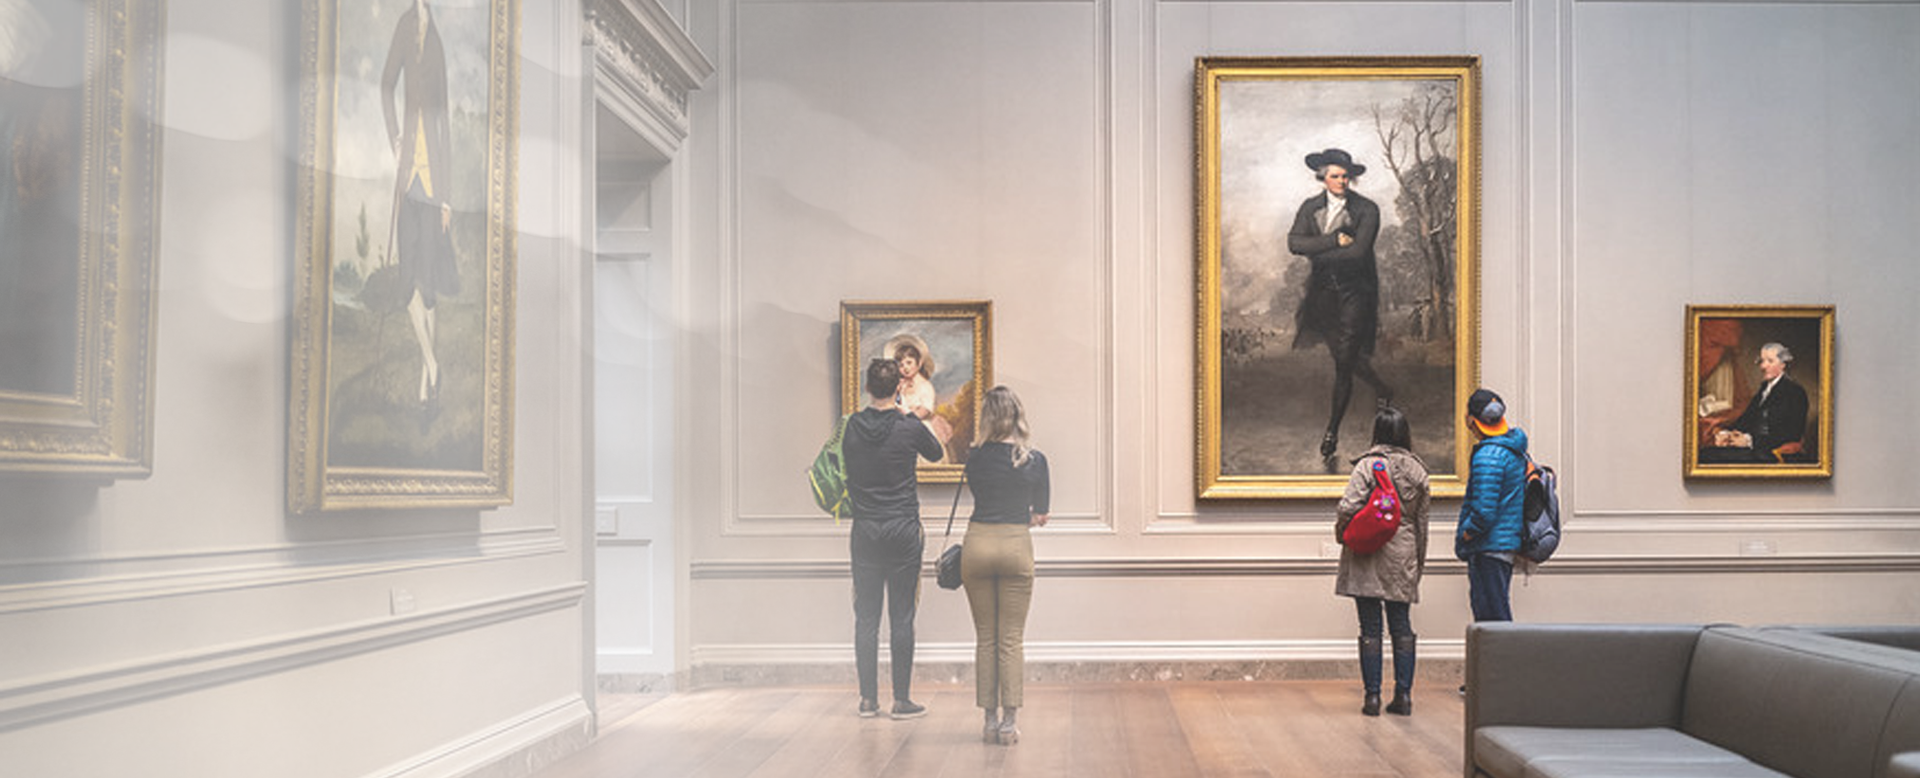 A National Art Gallery Case Study_Page Header